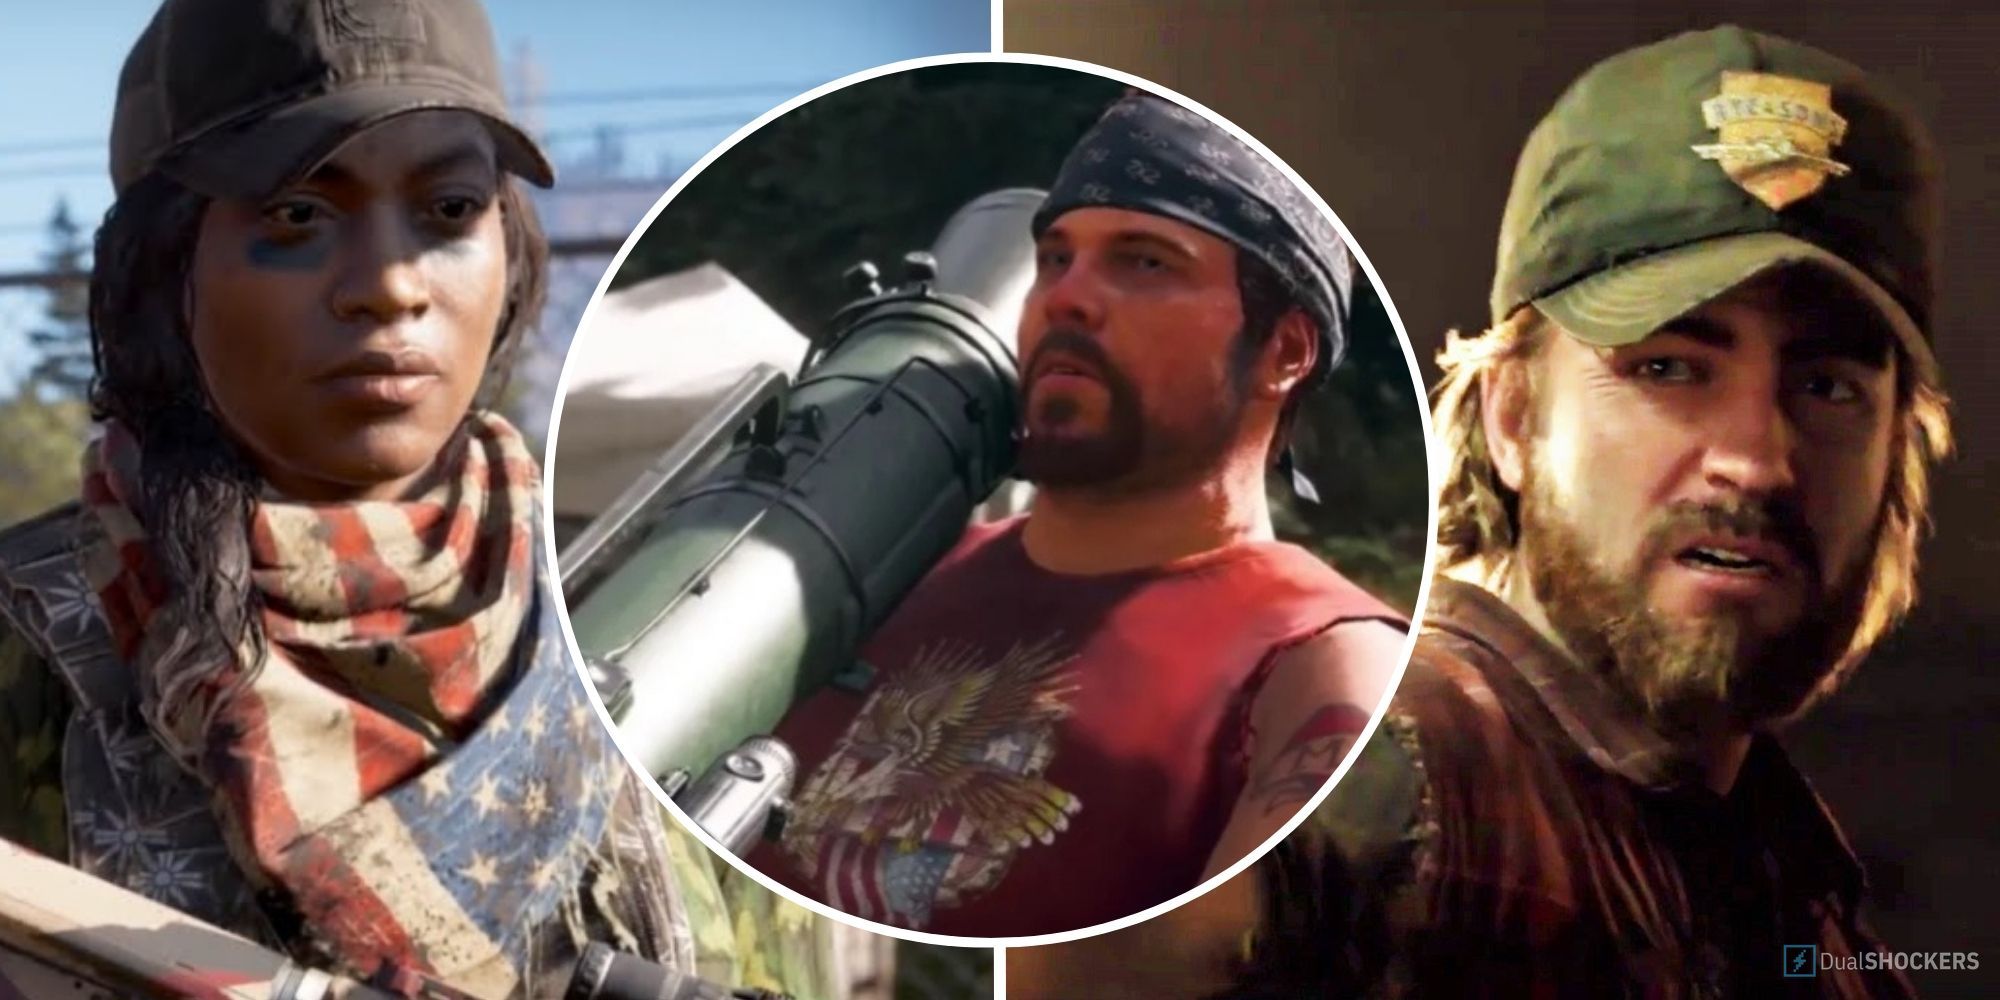 Far Cry 5 split image character looking somber, character wielding rocket launcher and character grimacing